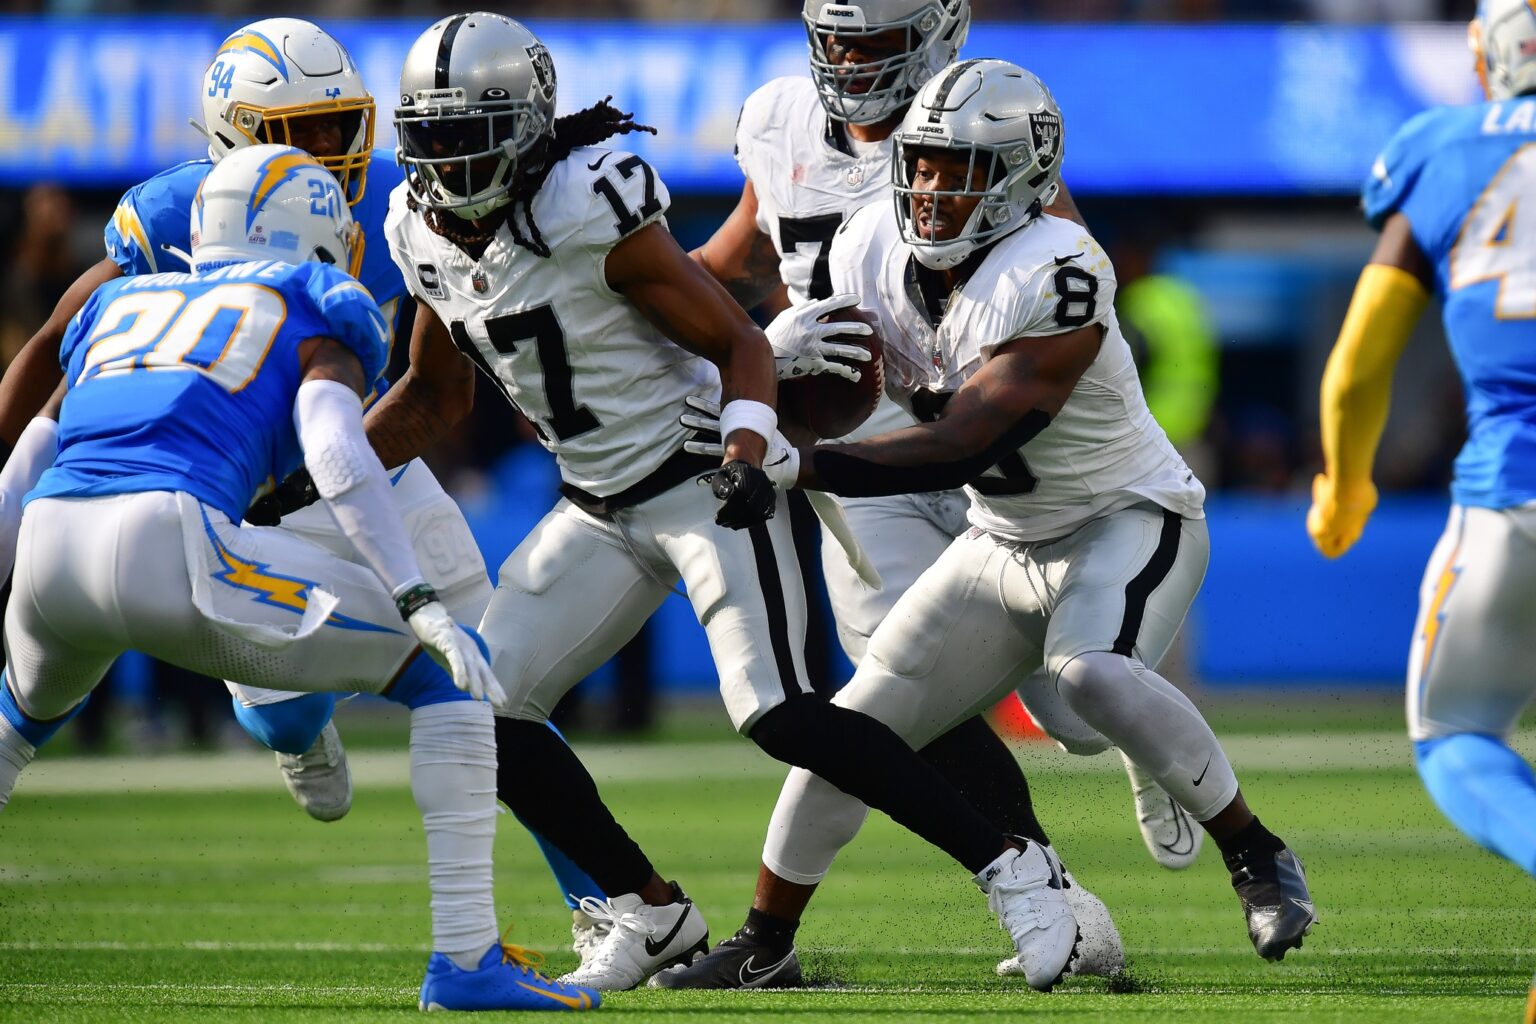 Oct 1, 2023; Inglewood, California, USA; Las Vegas Raiders running back Josh Jacobs (8) runs the ball as wide receiver Davante Adams (17) provides coverage against Los Angeles Chargers safety Dean Marlowe (20) during the second half at SoFi Stadium. Mandatory Credit: Gary A. Vasquez-USA TODAY Sports